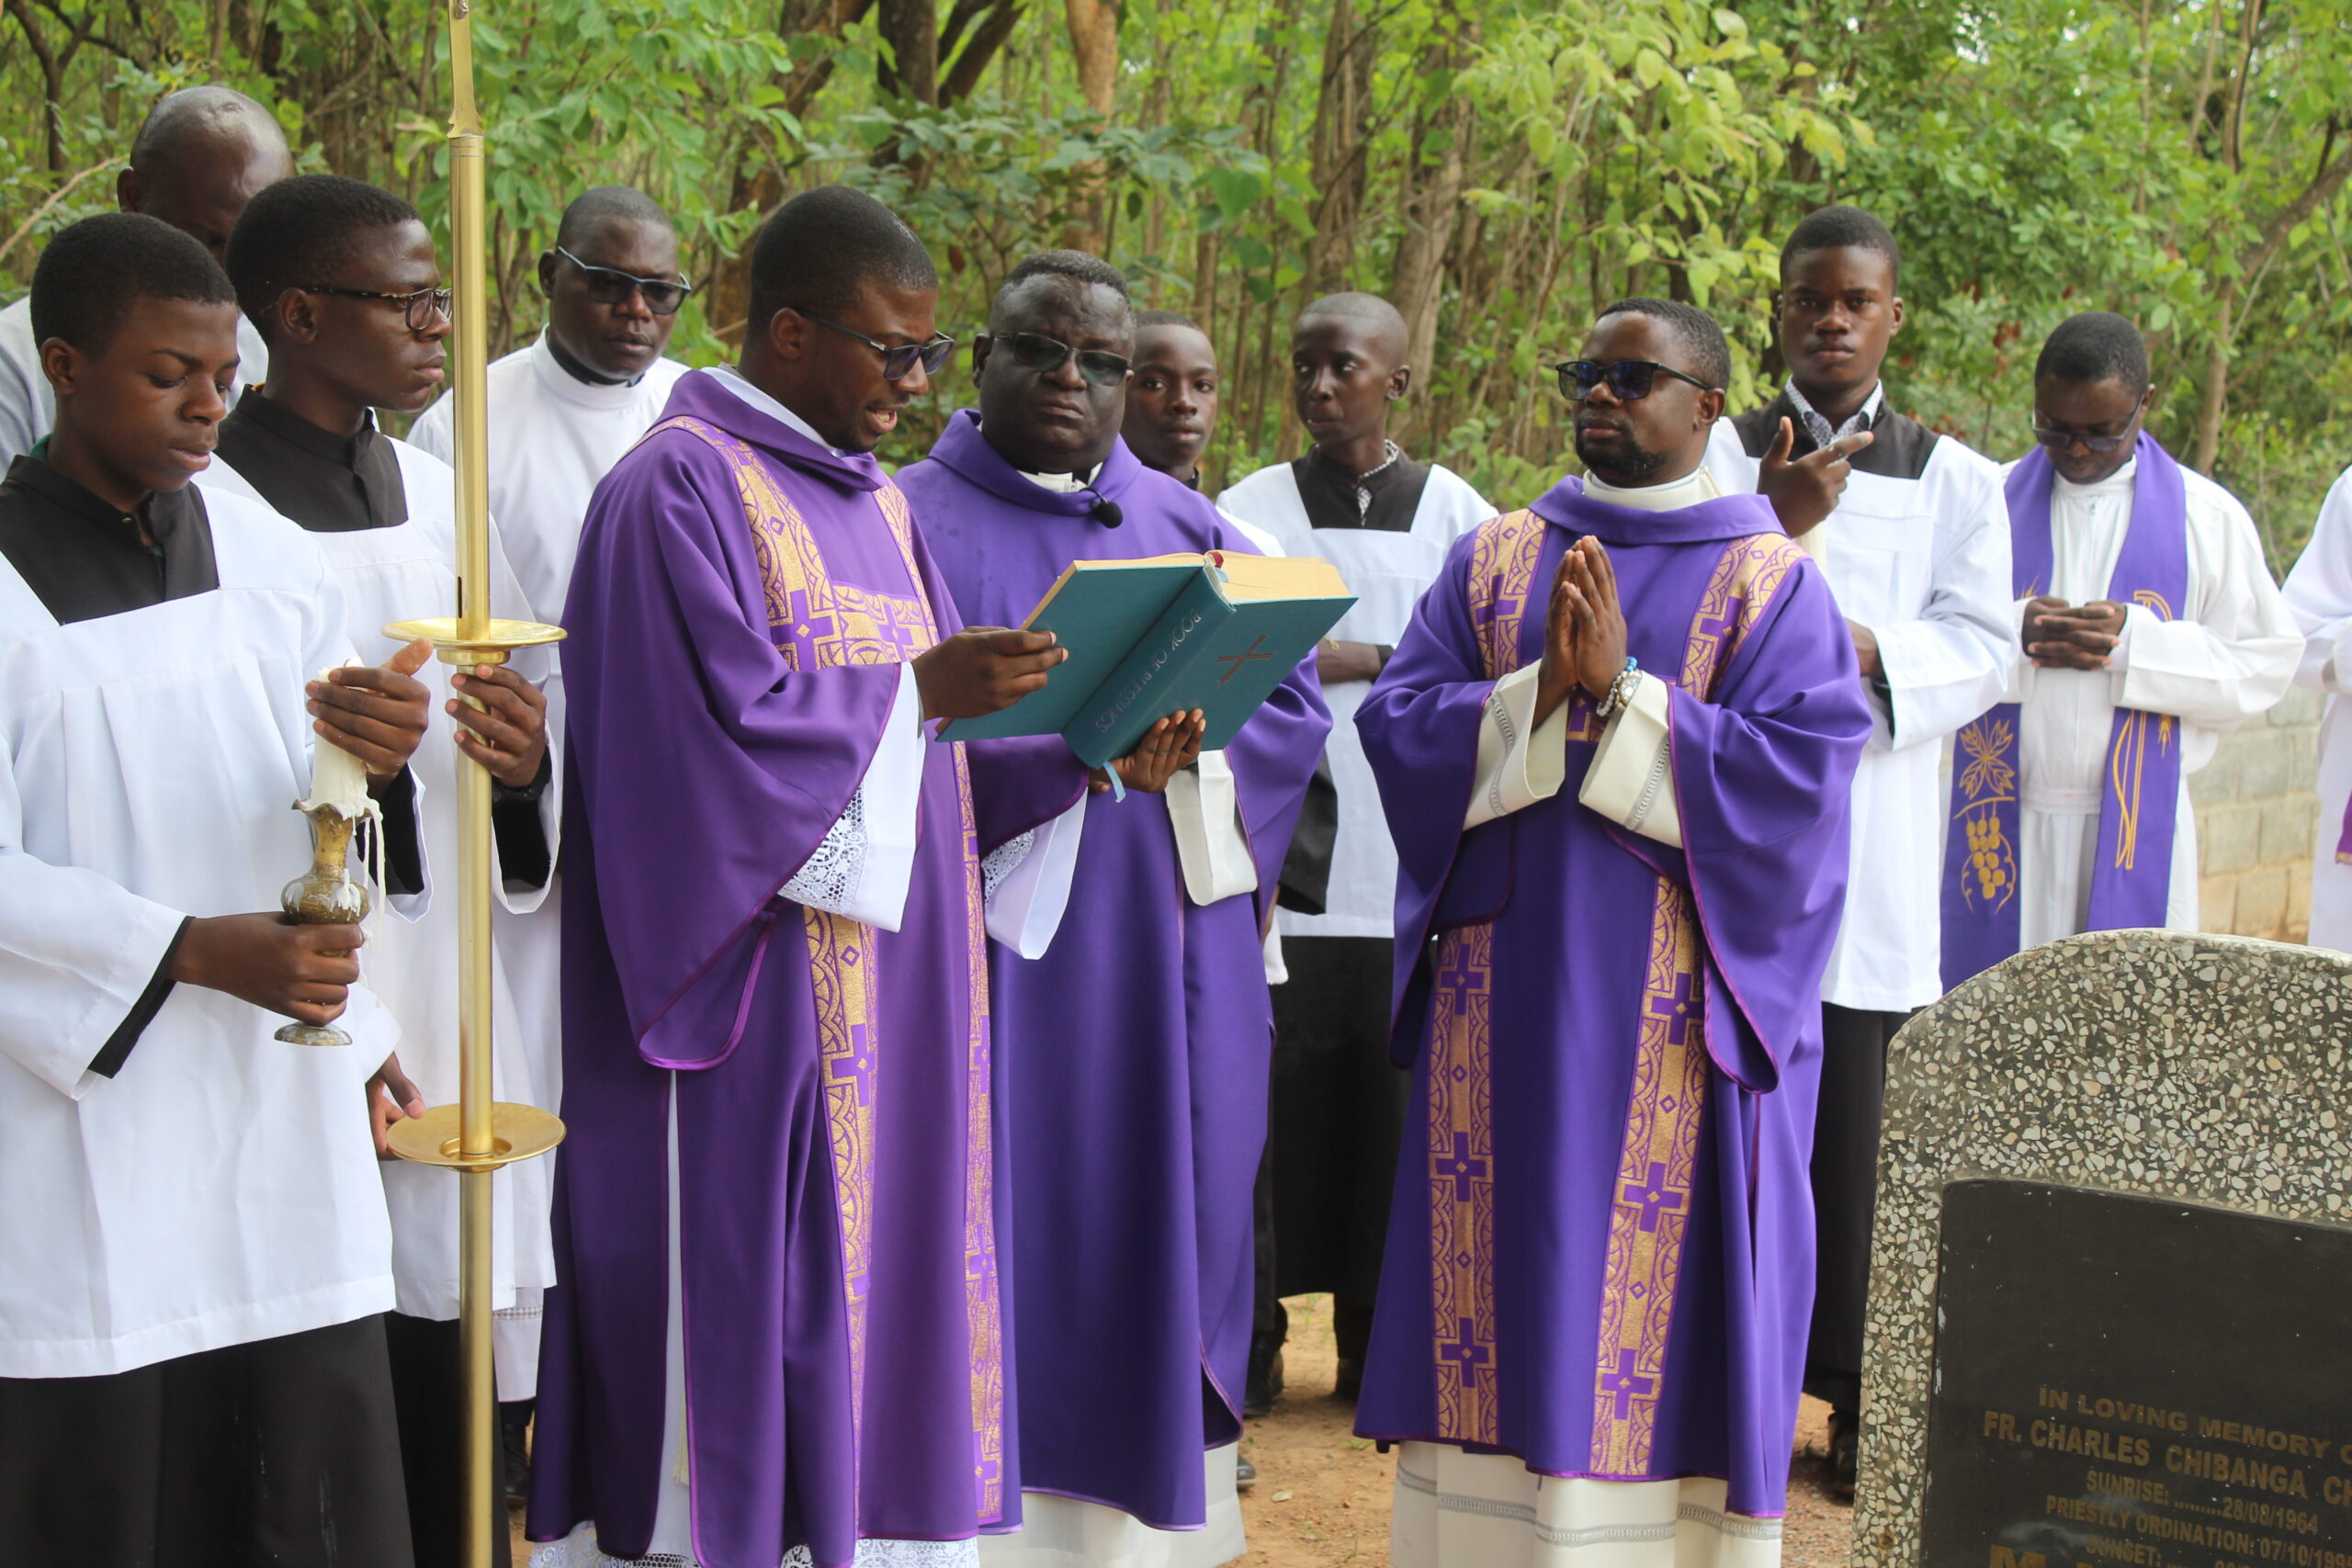 Mass for the departed Priests, Religious Men and Women